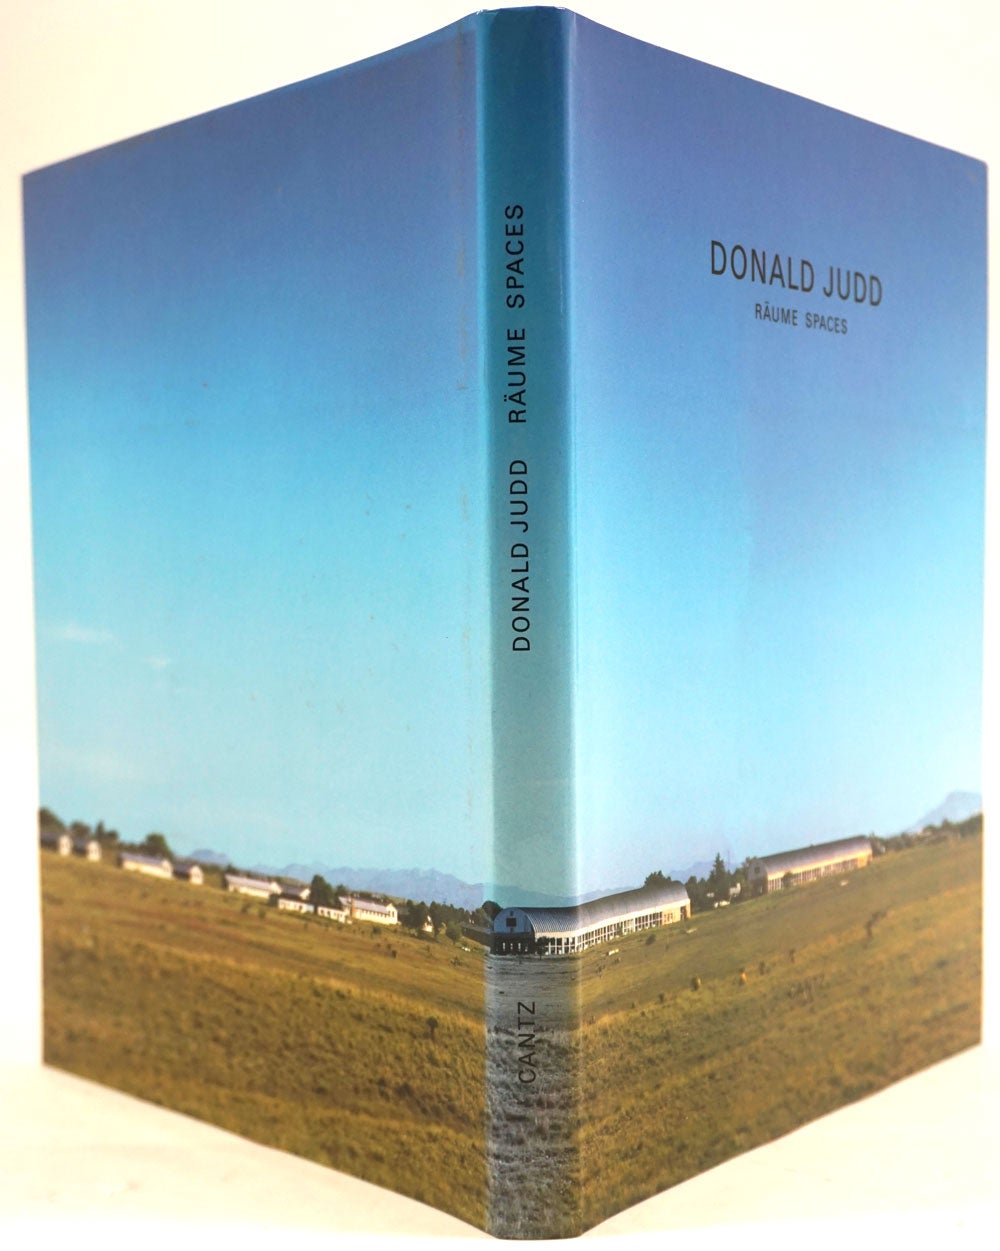 Donald Judd: Raume Spaces by Donald Judd, Renate Petzinger Volker  Rattemeyer on Antipodean Books, Maps & Prints